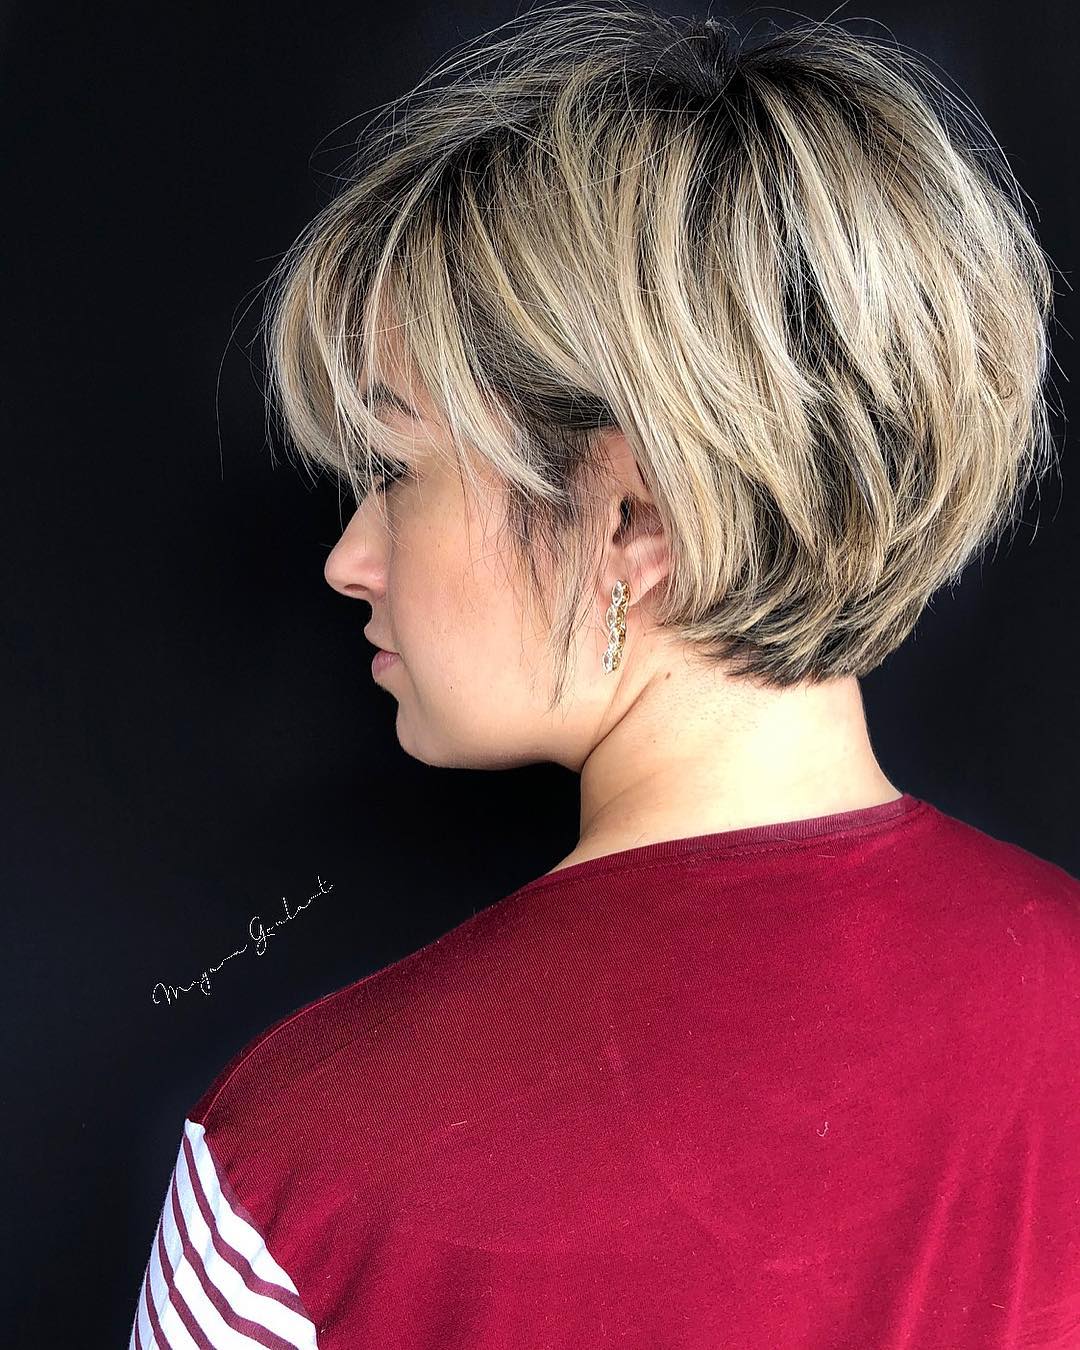 Layered haircuts for short hair for ladies 40-50 years old: 13 fashion ideas